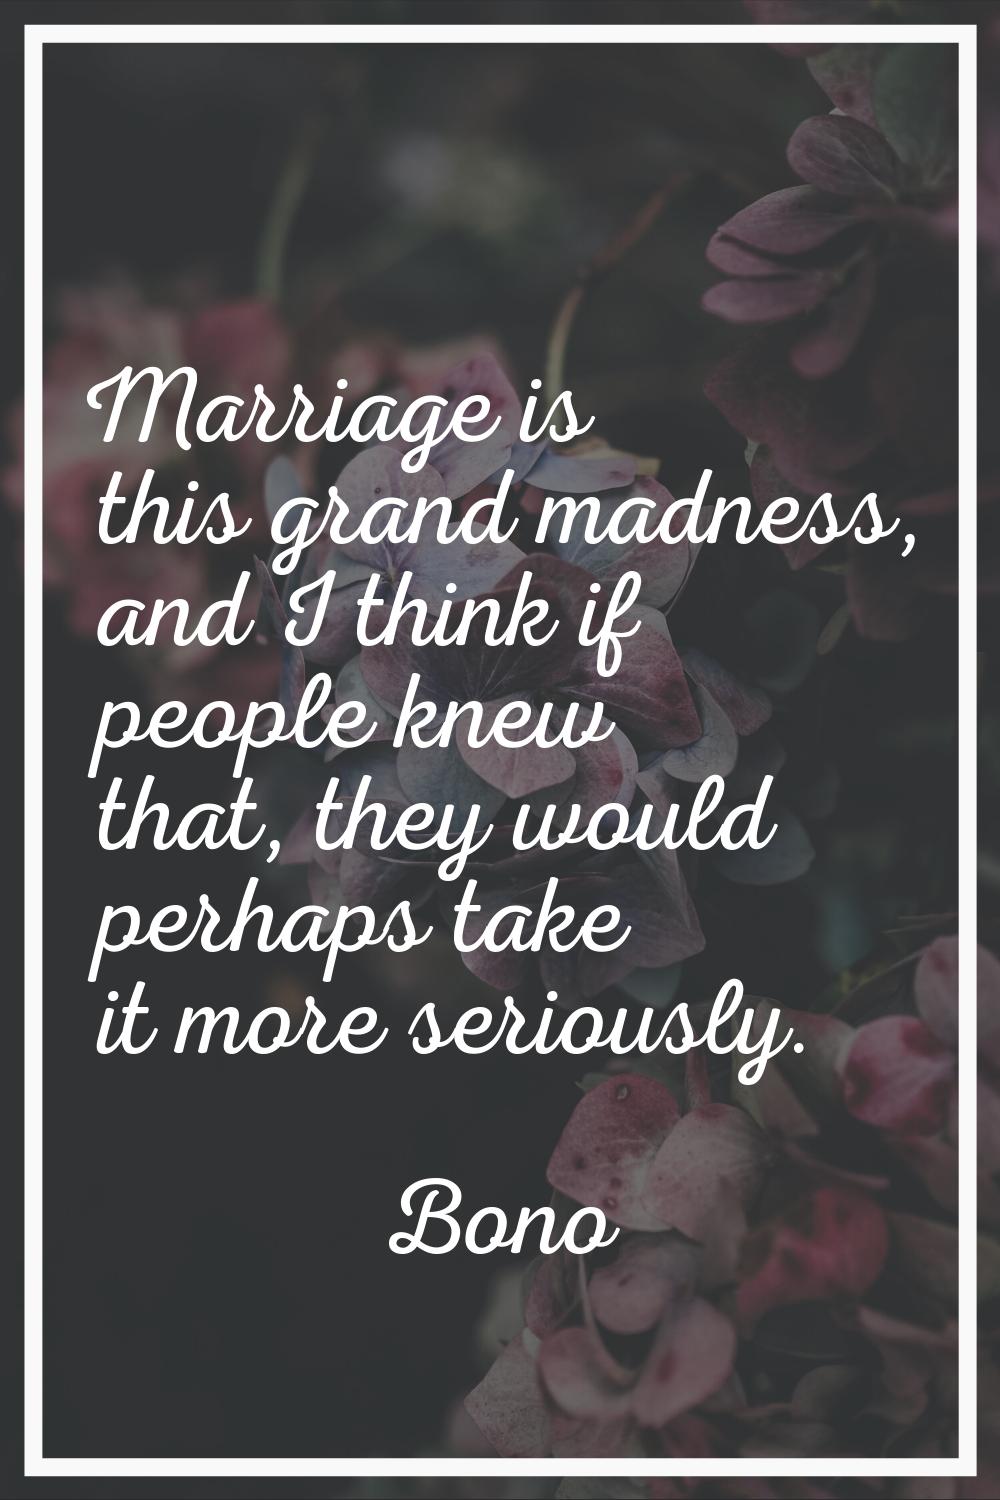 Marriage is this grand madness, and I think if people knew that, they would perhaps take it more se